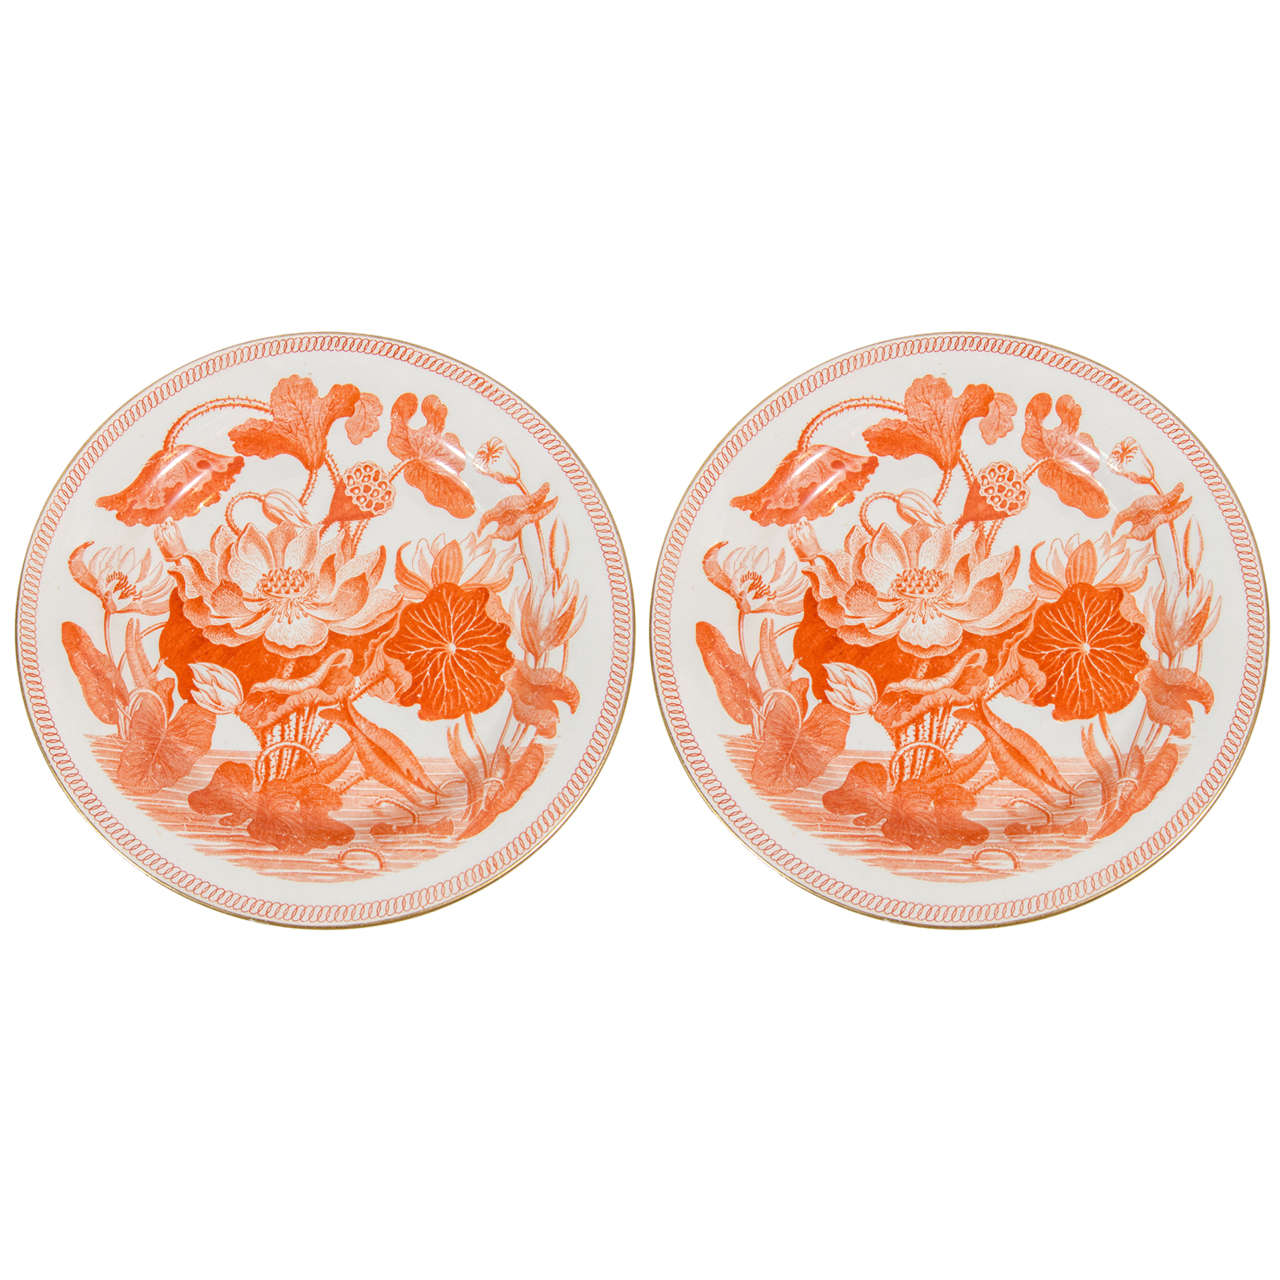 Pair of Wedgwood "Darwin" or "The Water Lily" Pattern Dishes in Orange